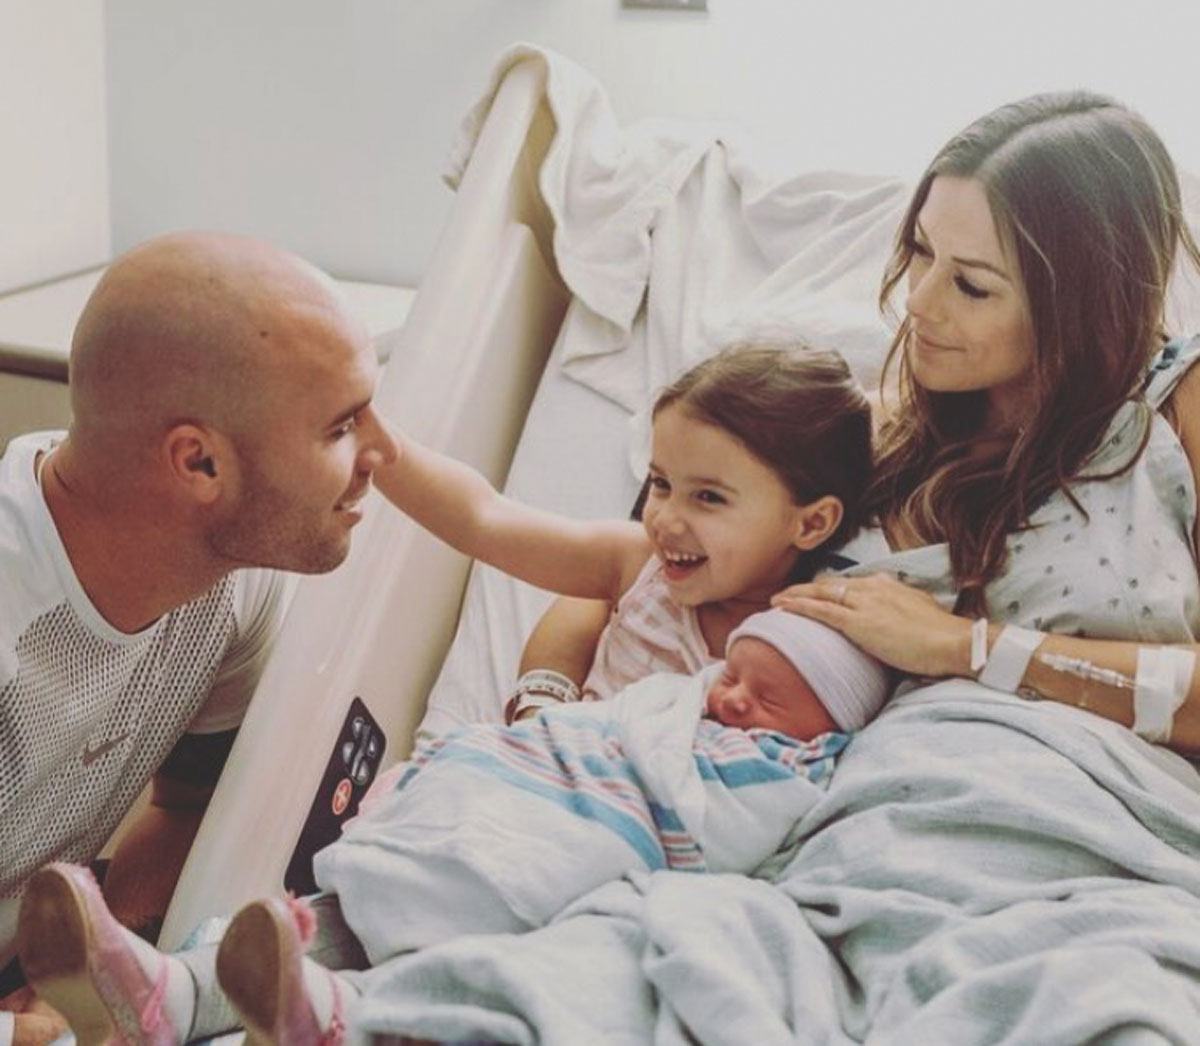 A look back at Jana Kramer and Mike Caussin's roller coaster relationship leading to divorce...